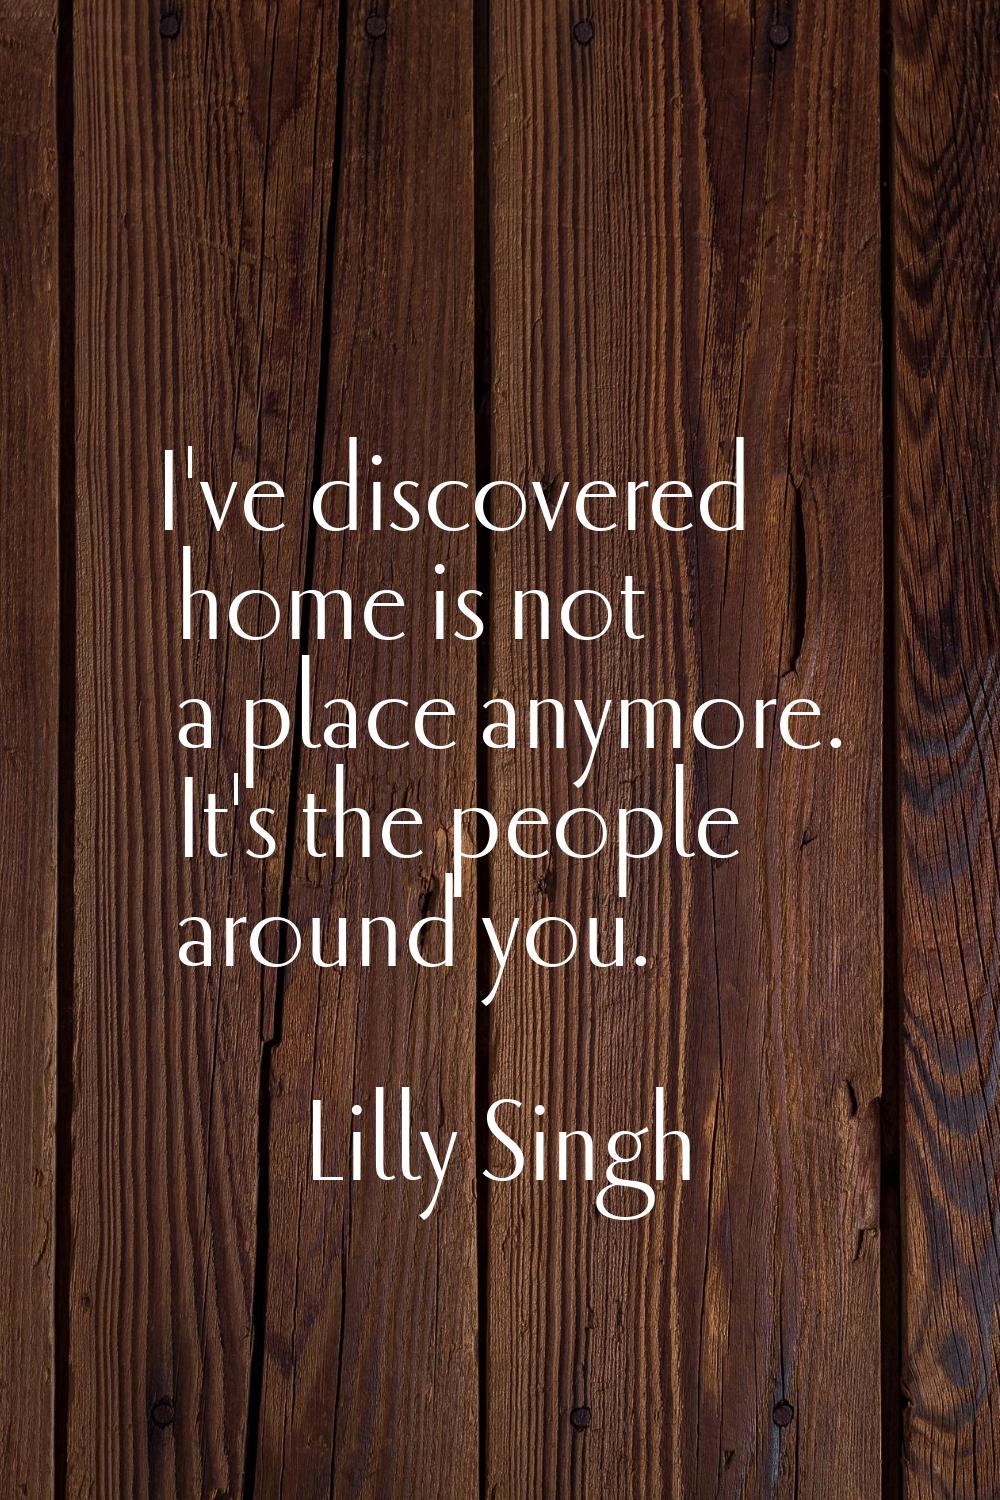 I've discovered home is not a place anymore. It's the people around you.